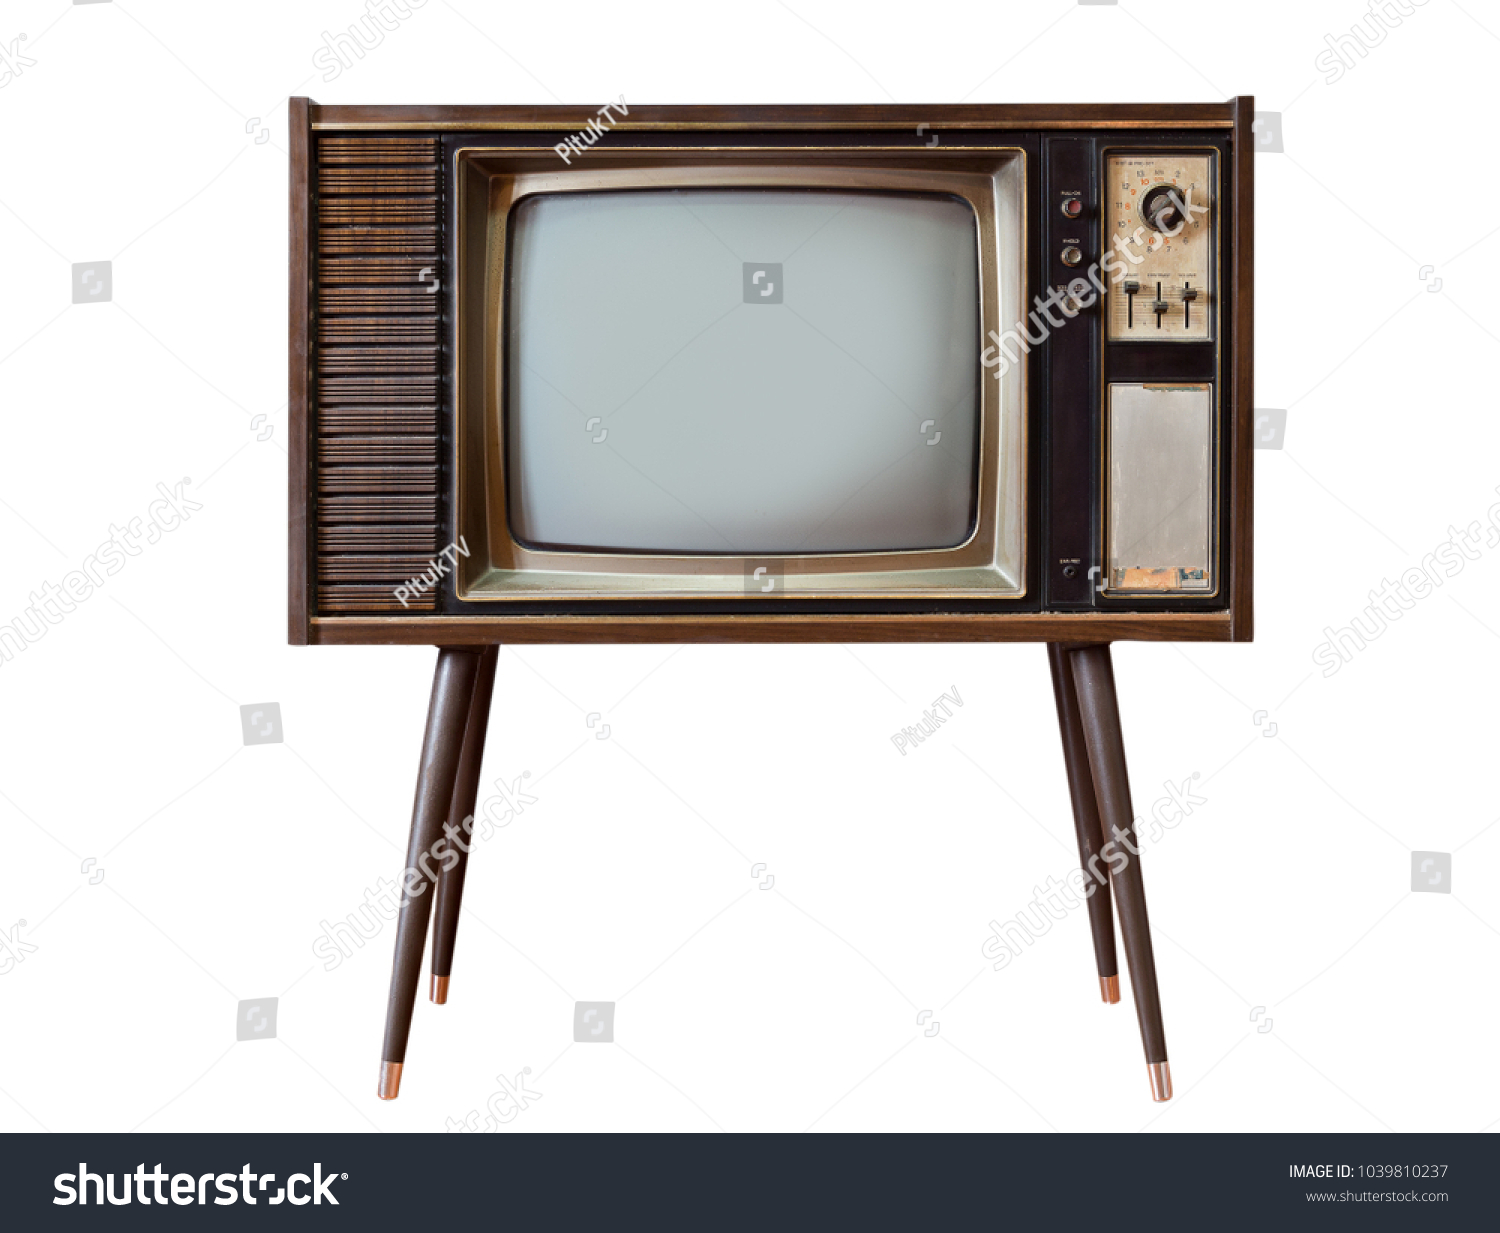 4,354 Old tv stand Images, Stock Photos & Vectors | Shutterstock